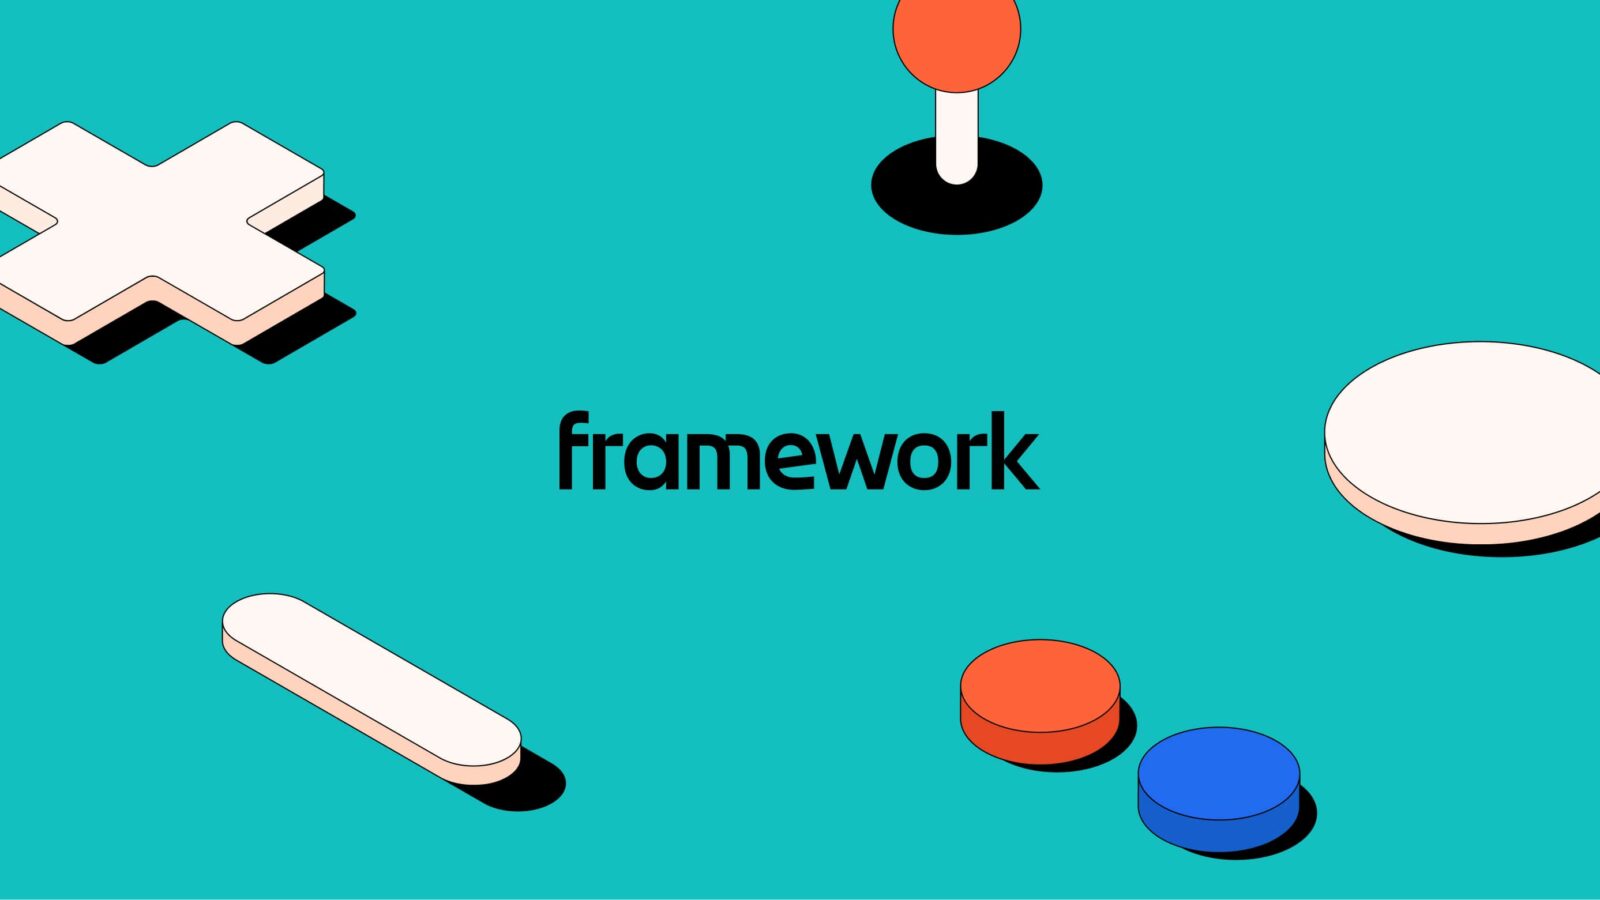 The New Genre Studio Revamps Framework, the Challenge Platform: A Fresh Approach to Online Learning